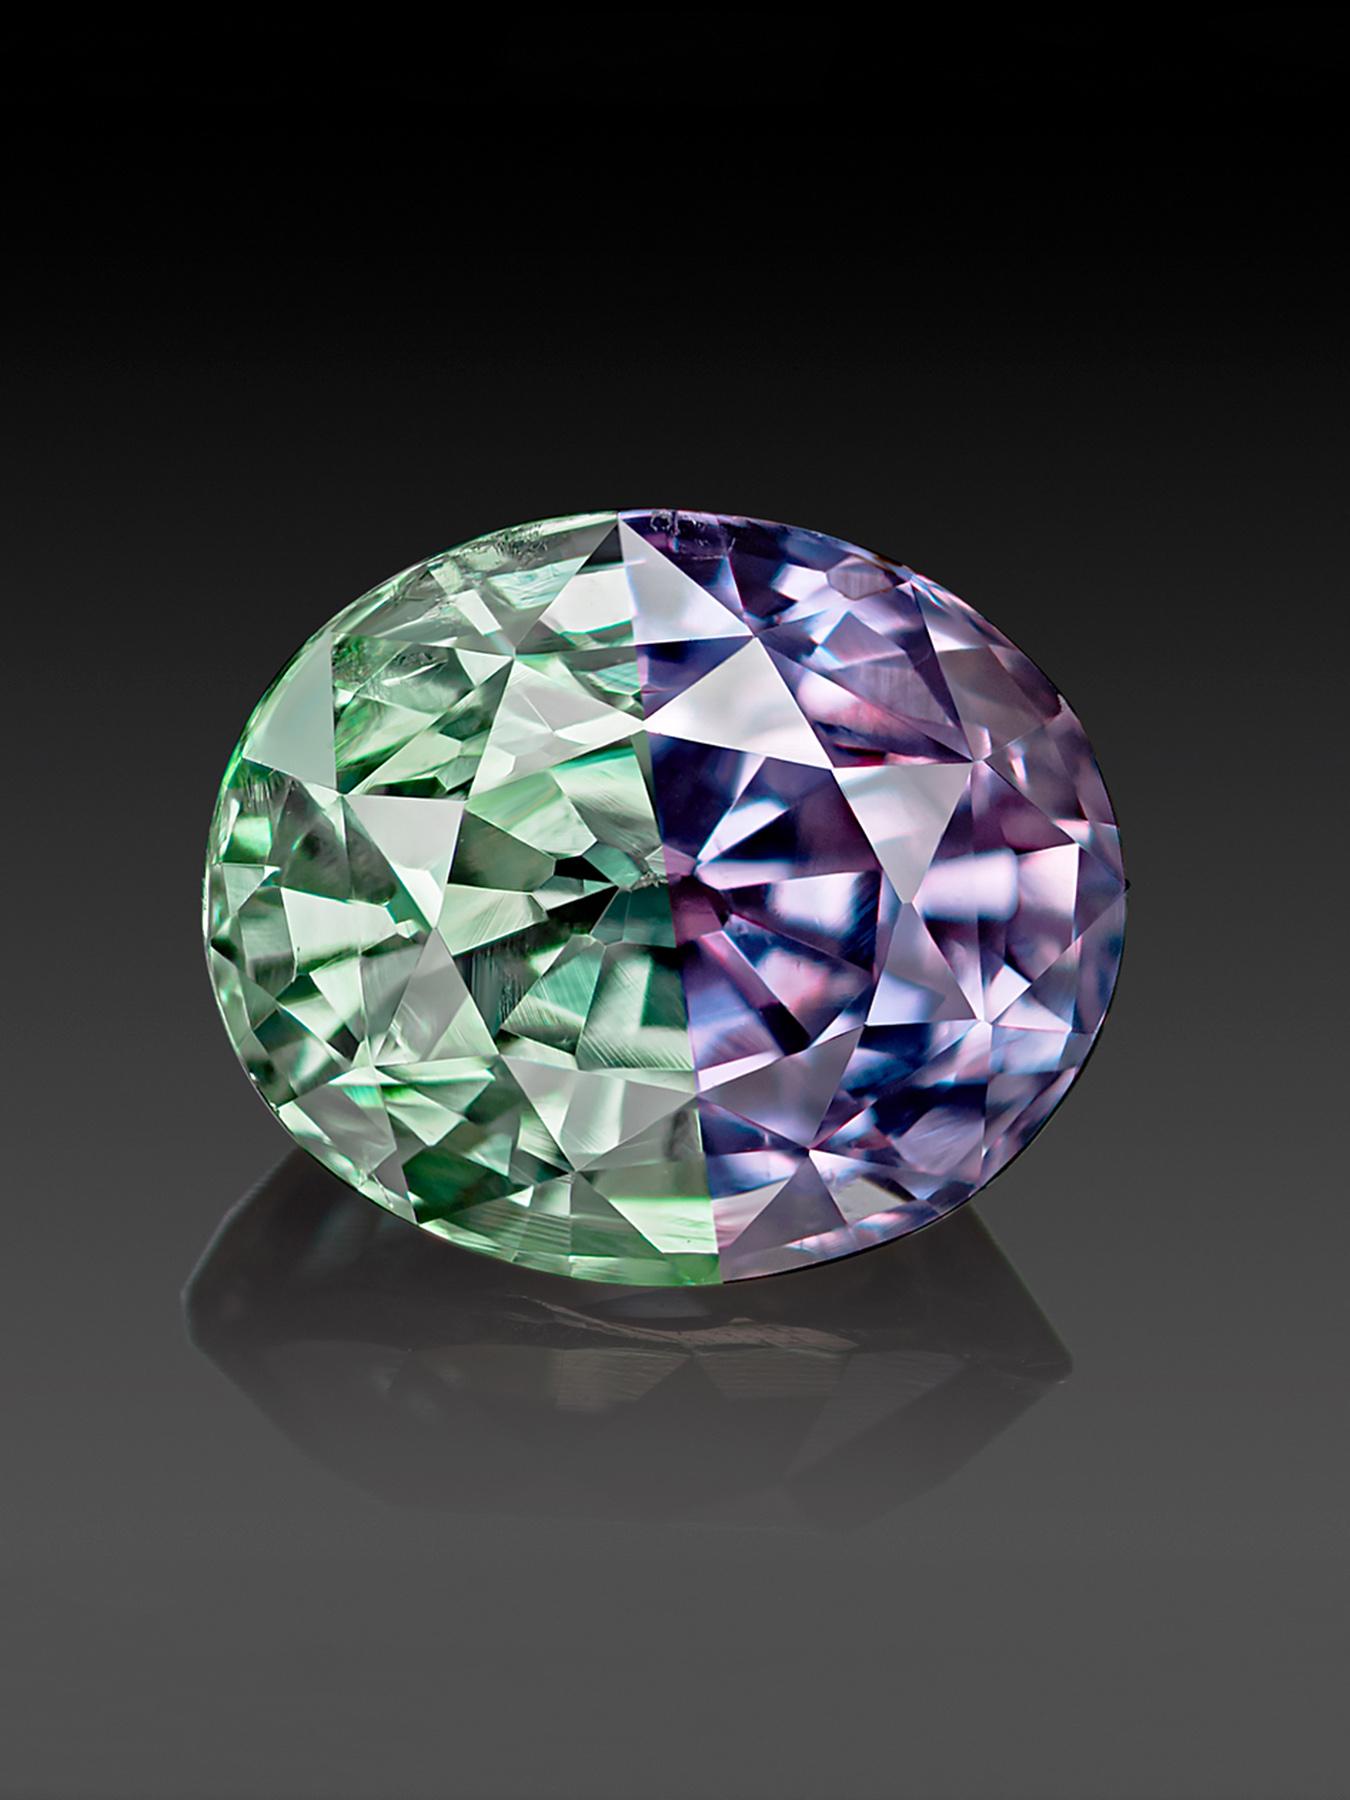 Natural Alexandrite (variety of chrysoberyl) oval cut

alexandrite origin - Tanzania

alexandrite measurements - 0.25 x 0.21 x 0.17 in / 6.32 x 5.33 x 4.23 mm

color in daylight - bluish green G 5/2, color with incandescent lamp - pink rP